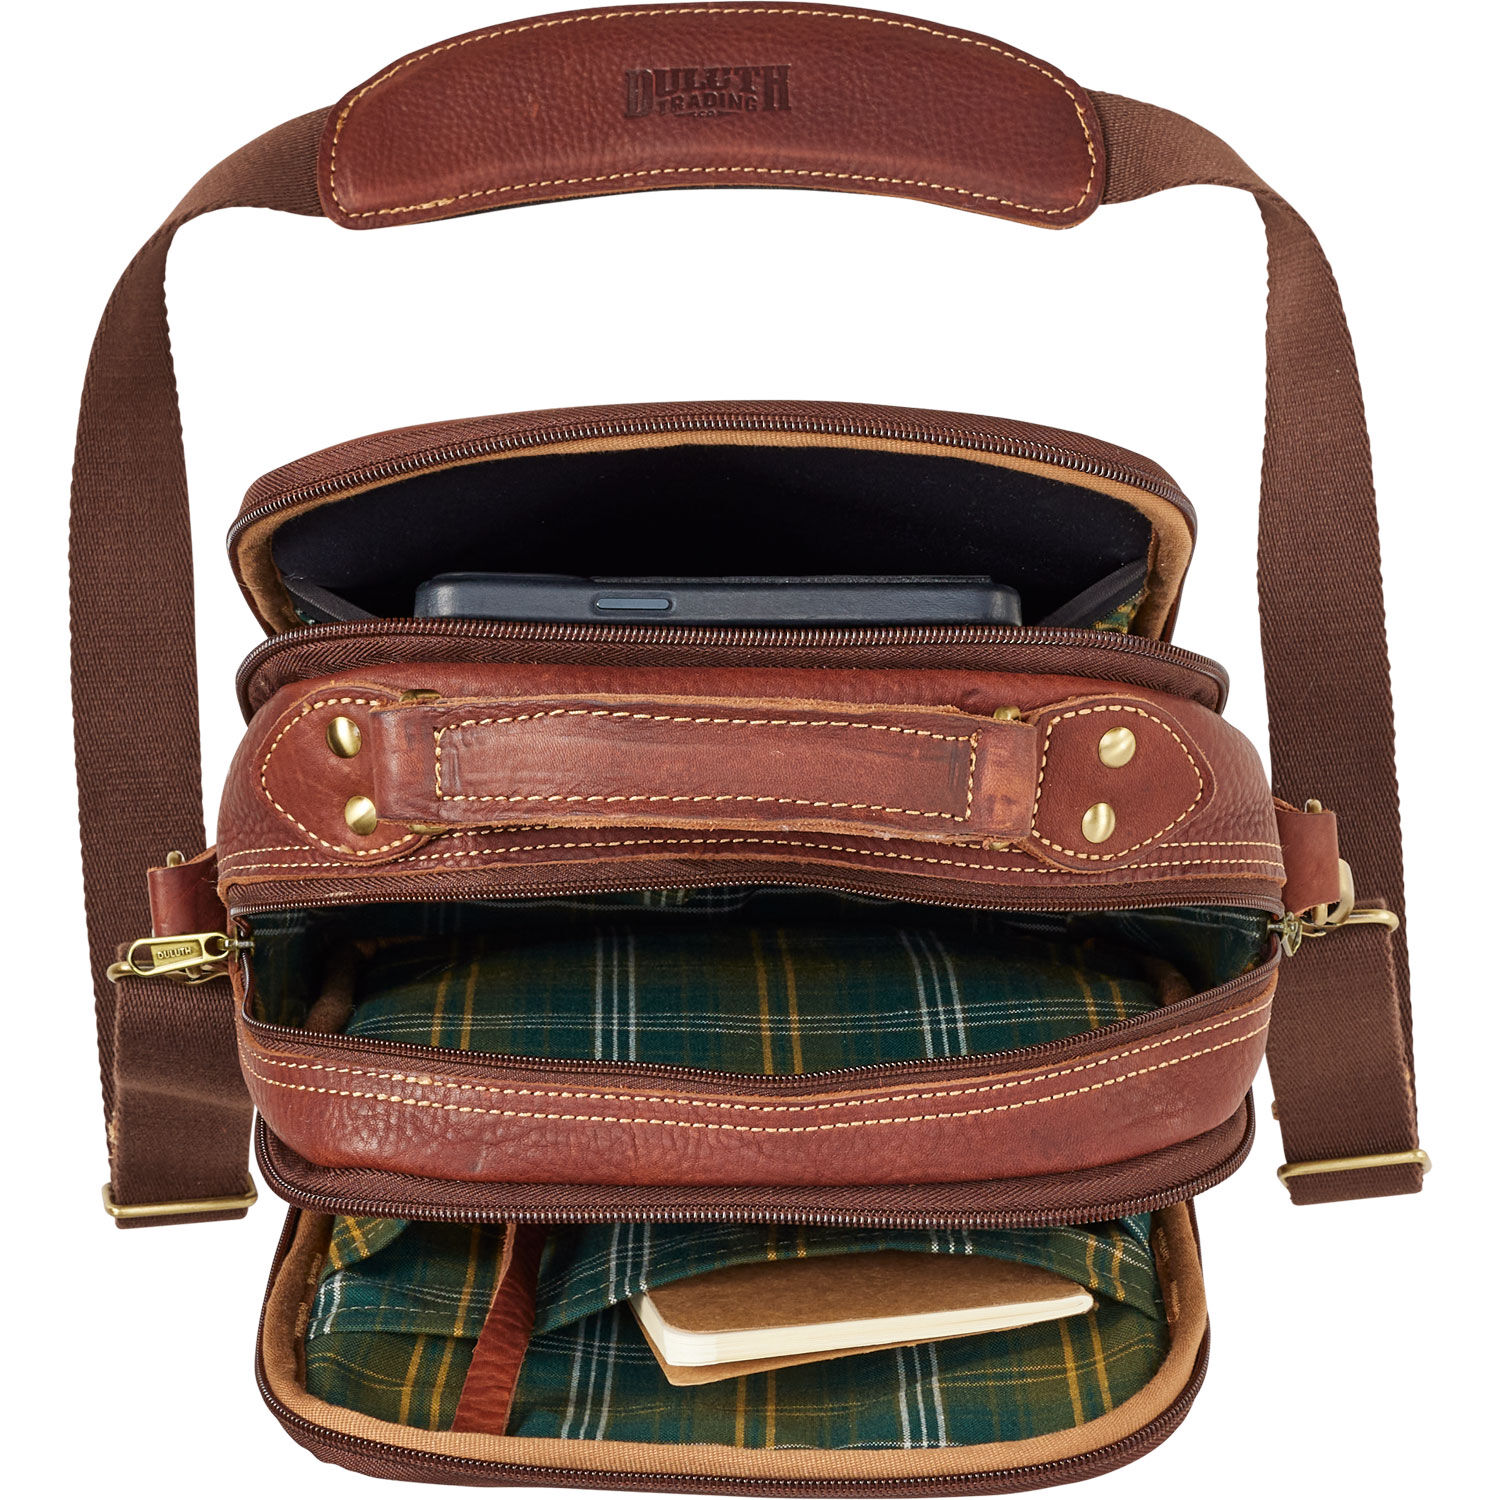 The Bagsmart Toiletry Bag is an Affordable Packing Essential for Any Trip |  Trusted Since 1922